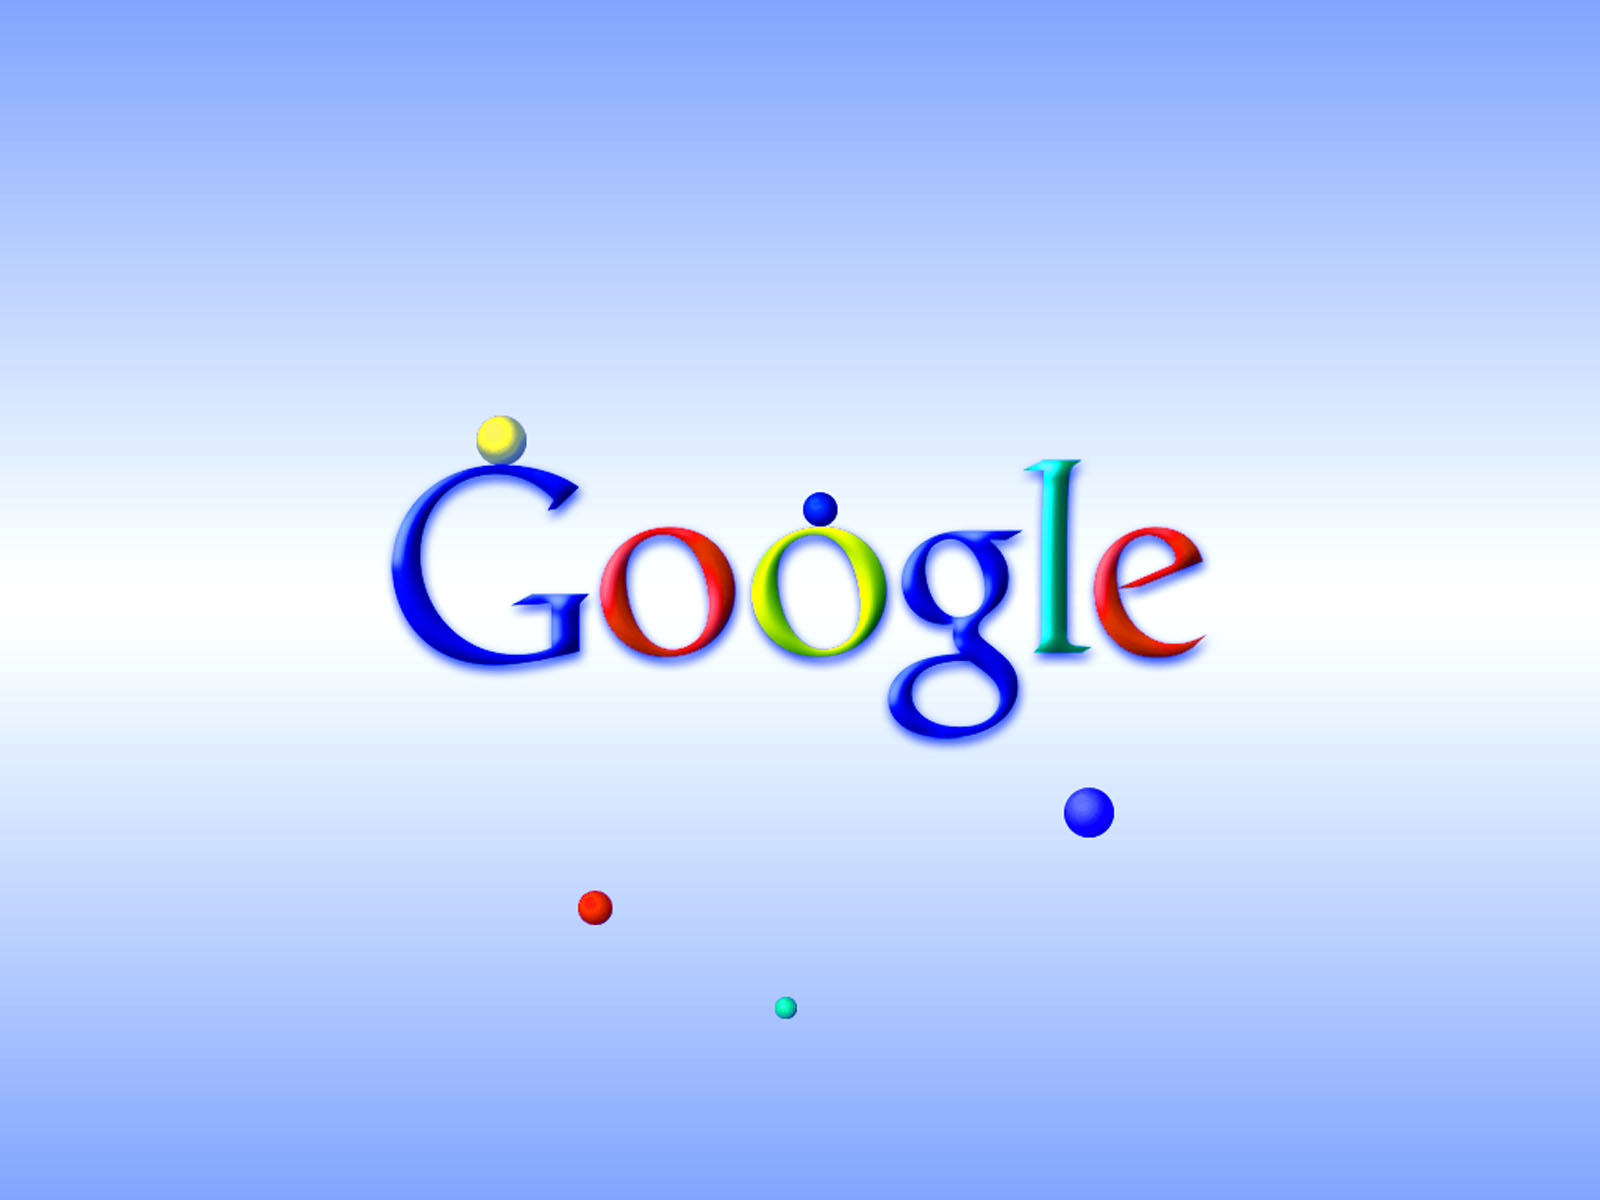 Free Download Cute Google Logo Wallpaper Pc Wallpaper High Resolution 1600x10 For Your Desktop Mobile Tablet Explore 50 Cute Wallpapers On Google Images Of Cute Wallpapers Cute Teen